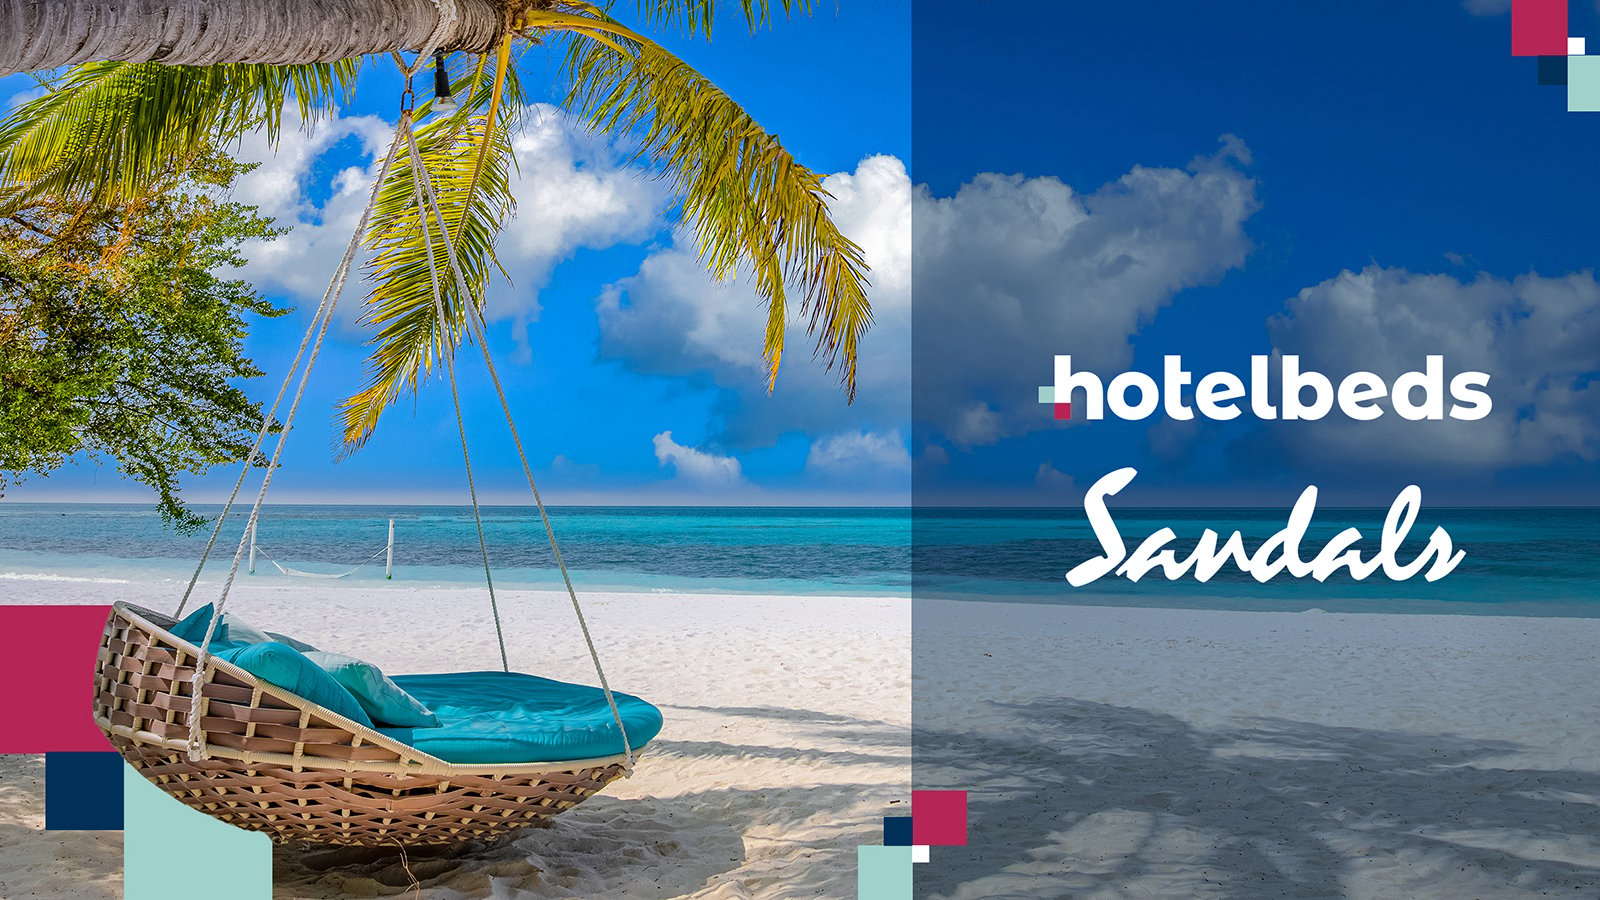 Hotelbeds Sandals partnership